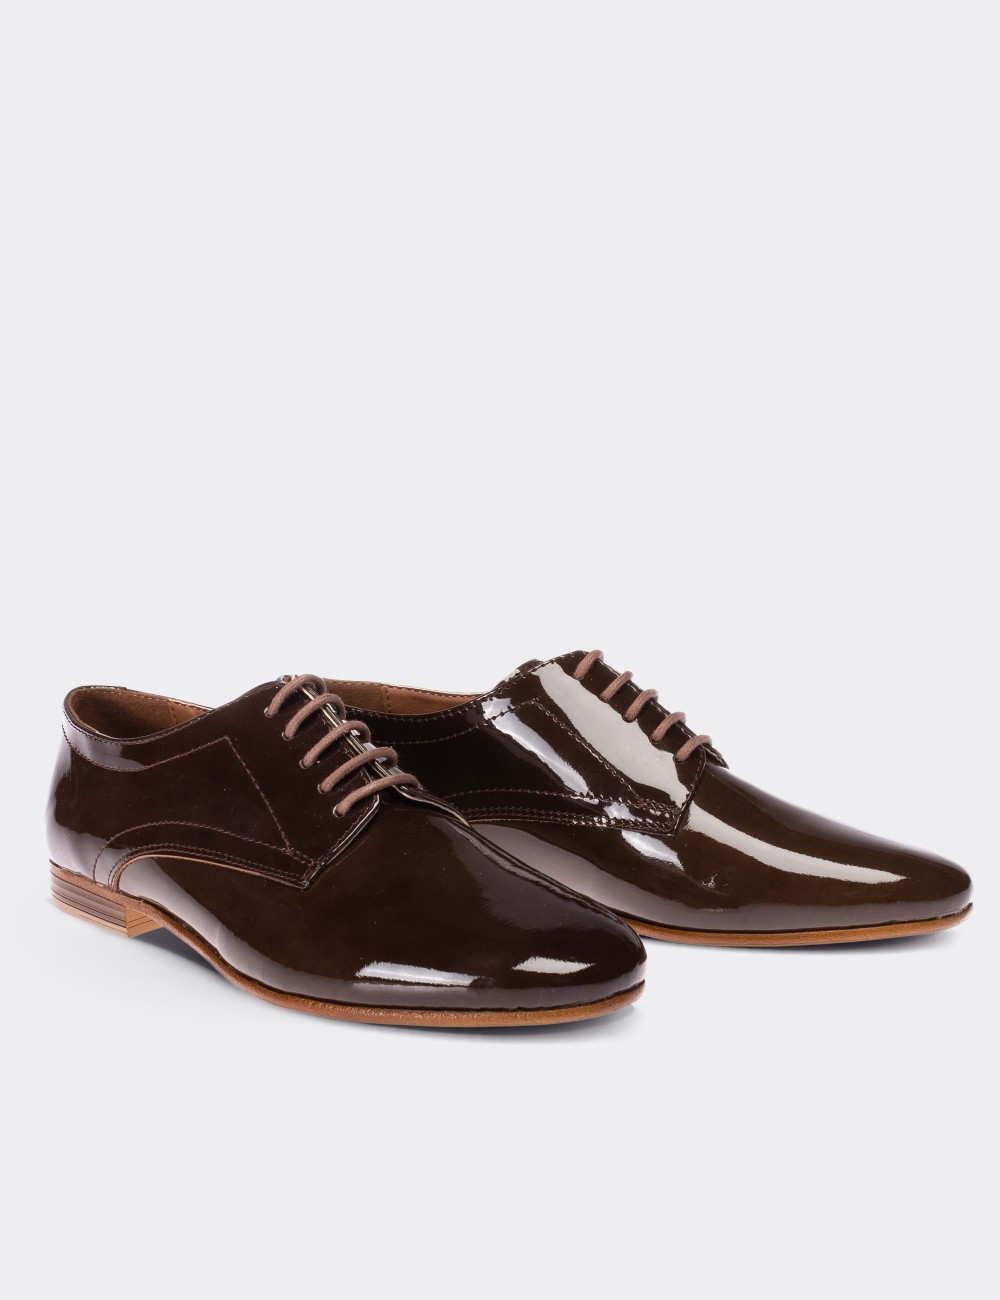 Brown Patent Leather Lace-up Shoes - 01430ZKHVC02